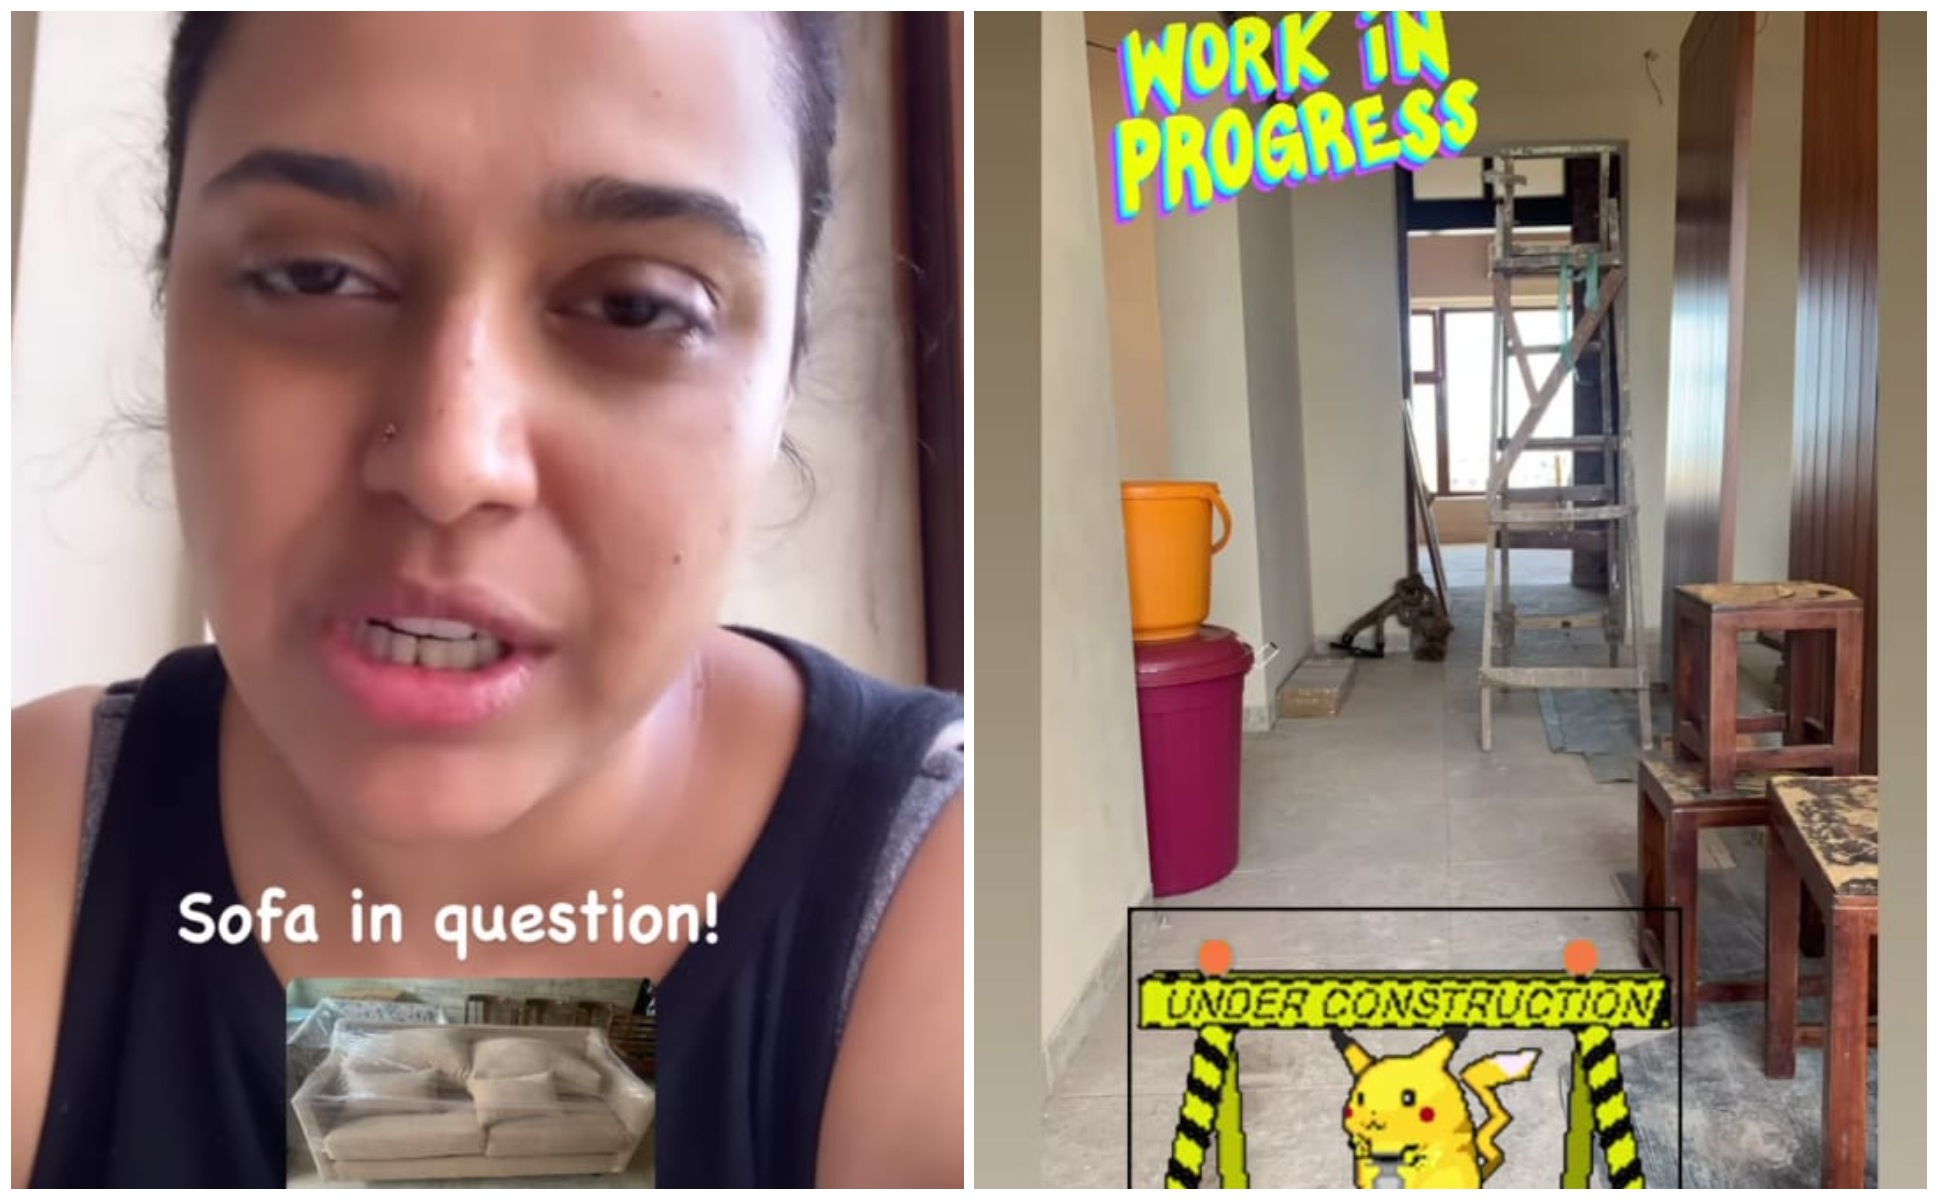 Swara Bhasker’s home has been under renovation for two-and-a-half years now.